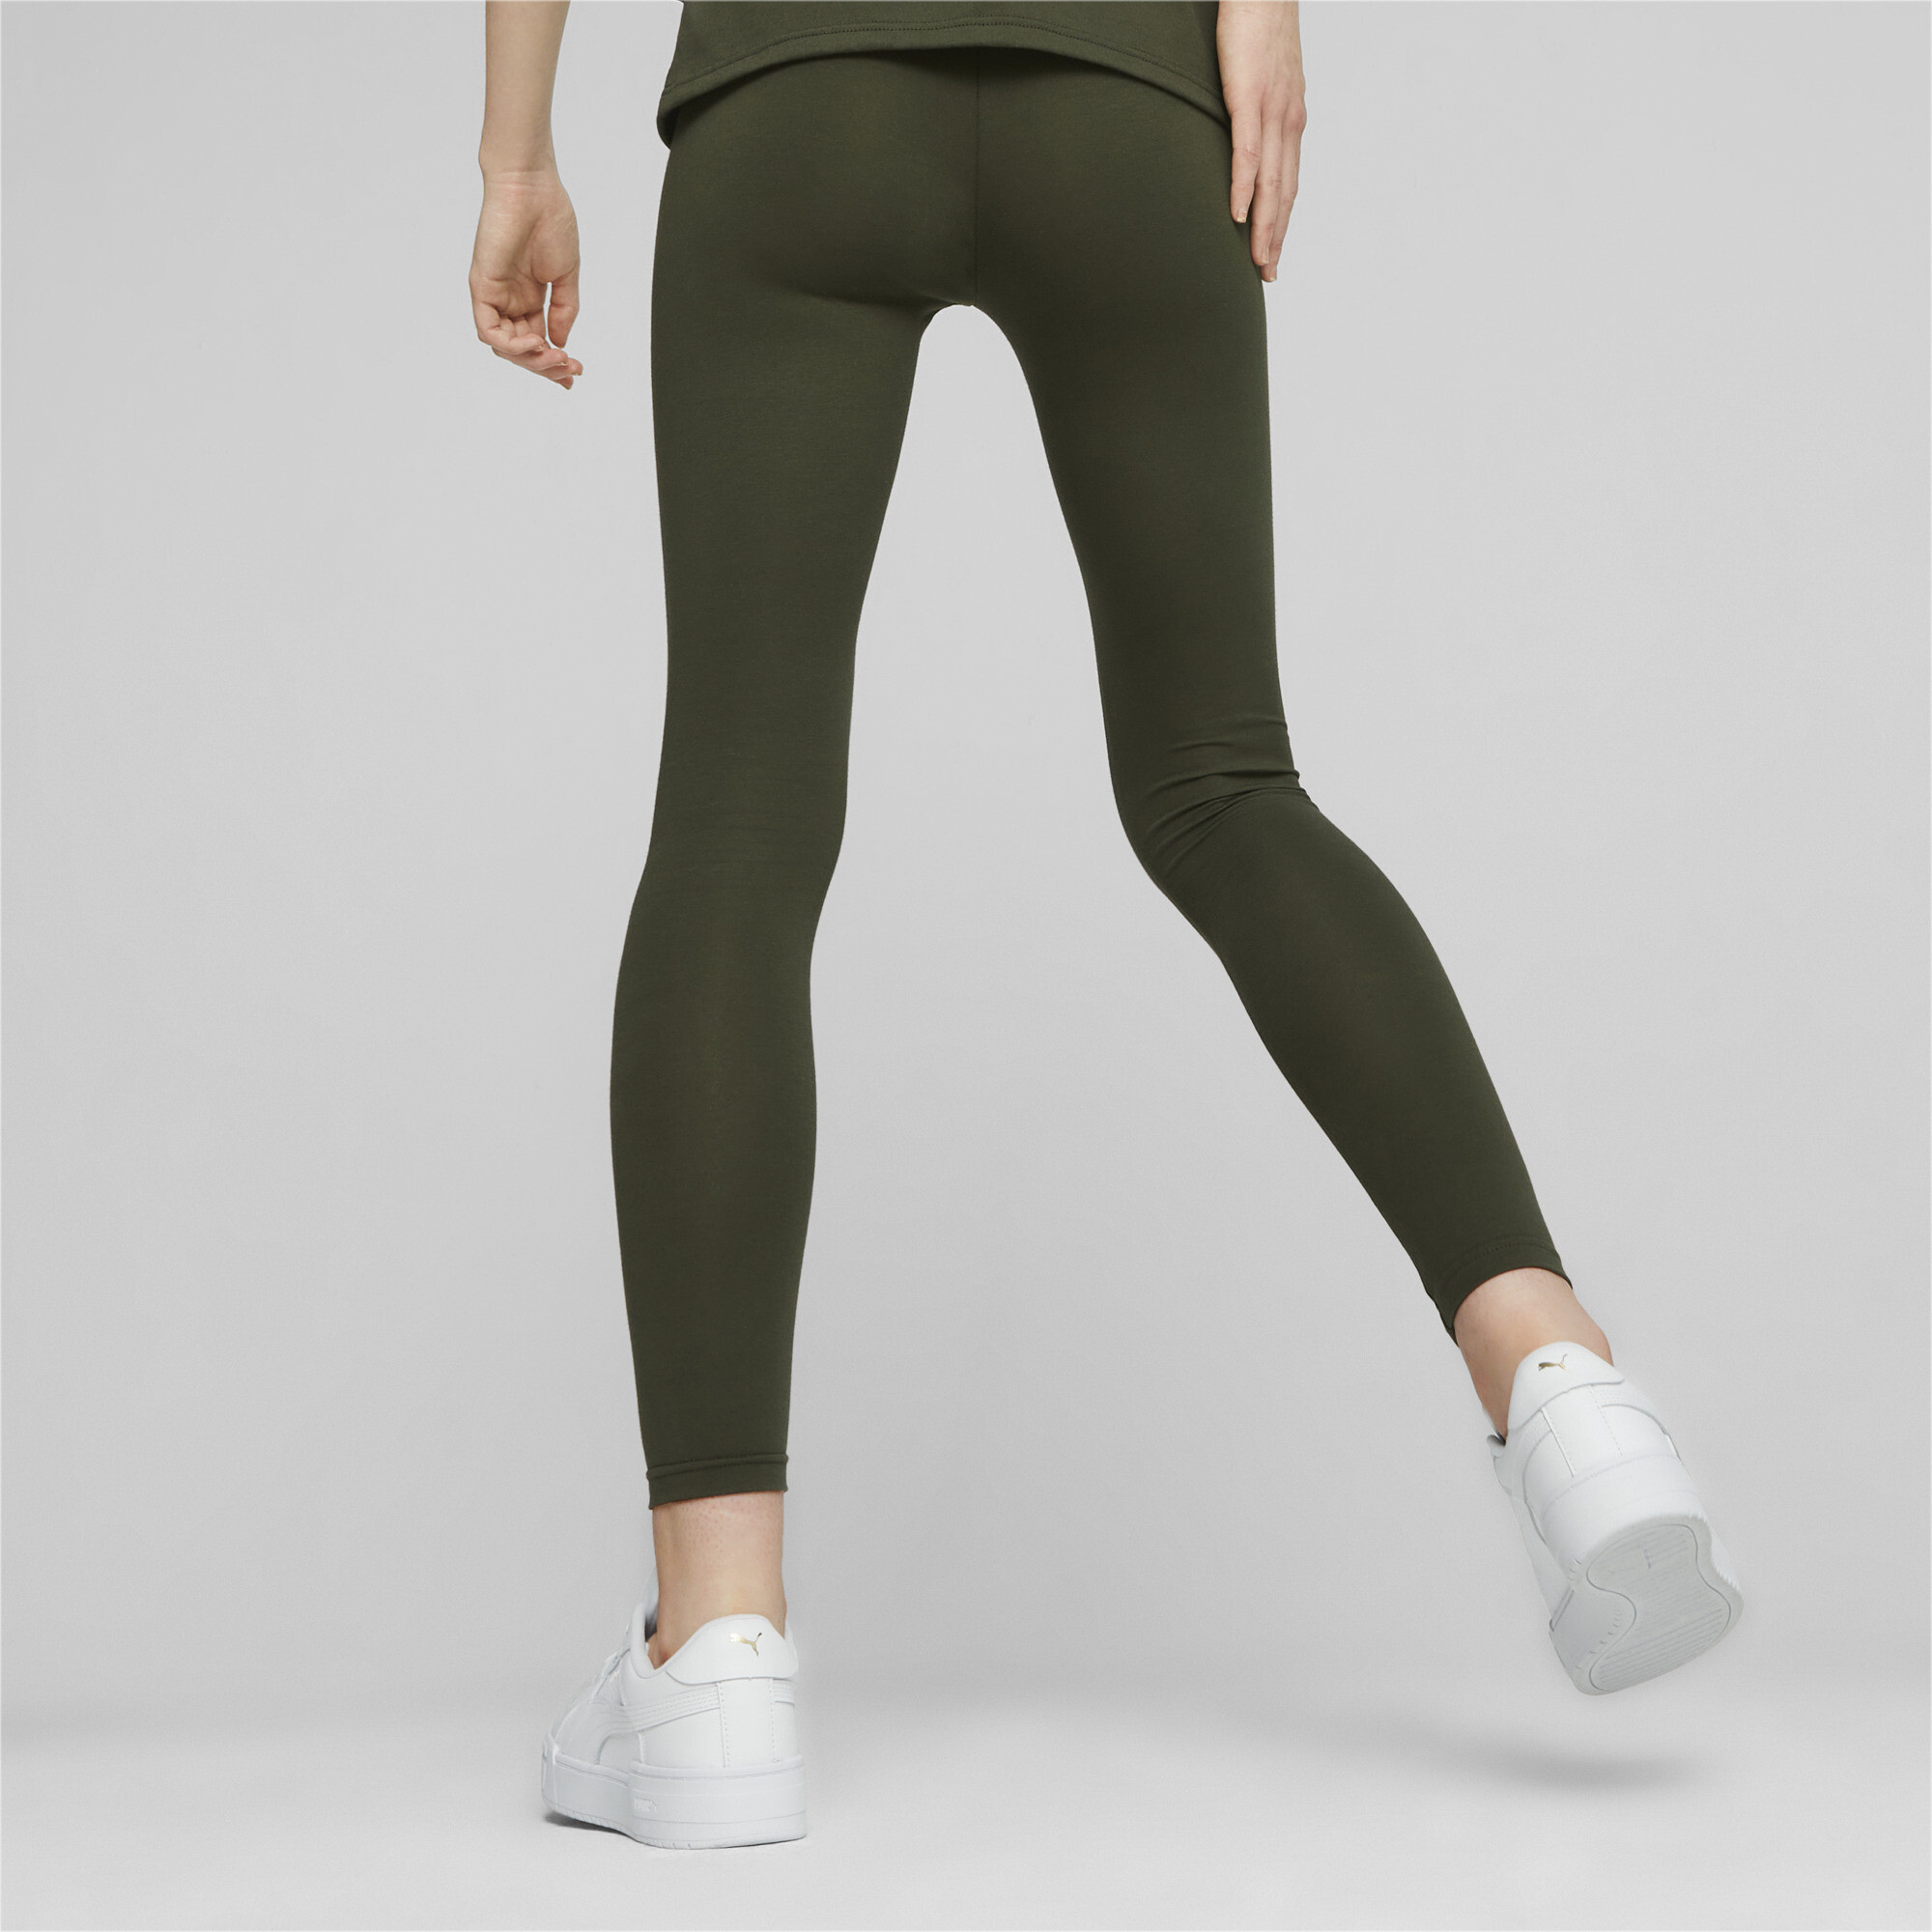 Women's Puma Made In France Leggings, Green, Size L, Clothing